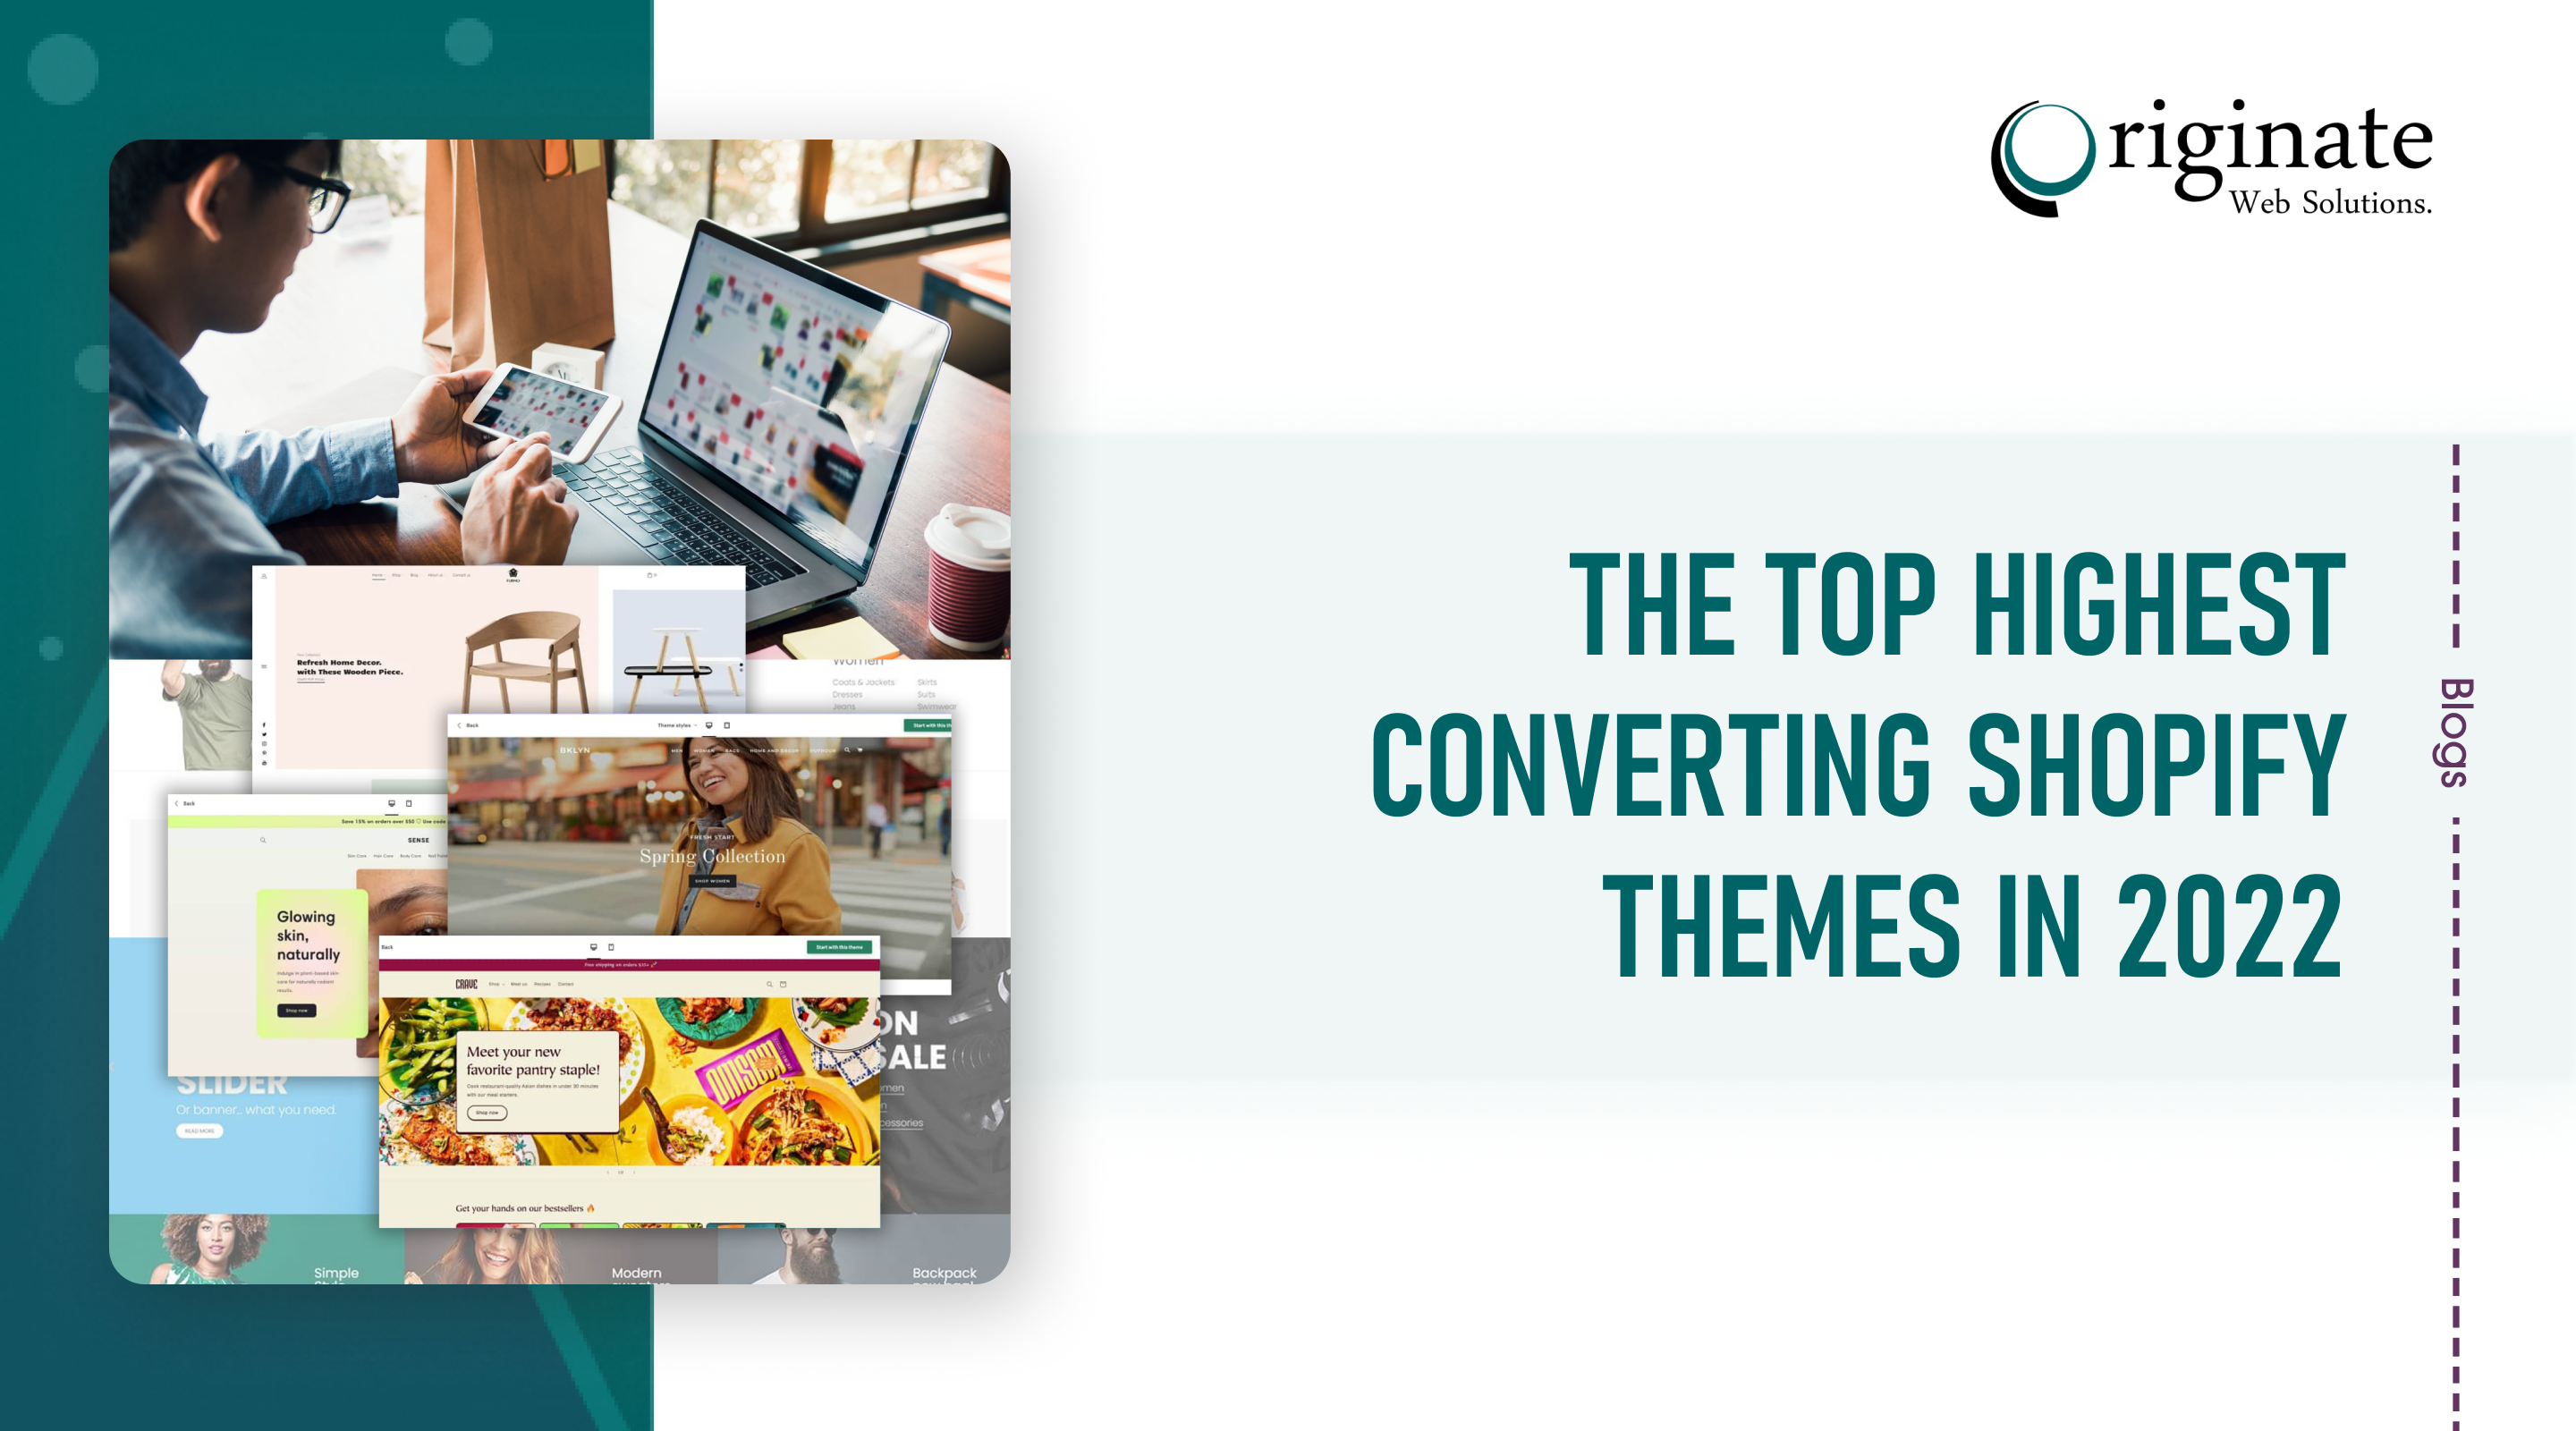 The Top Highest Converting Shopify Themes in 2022